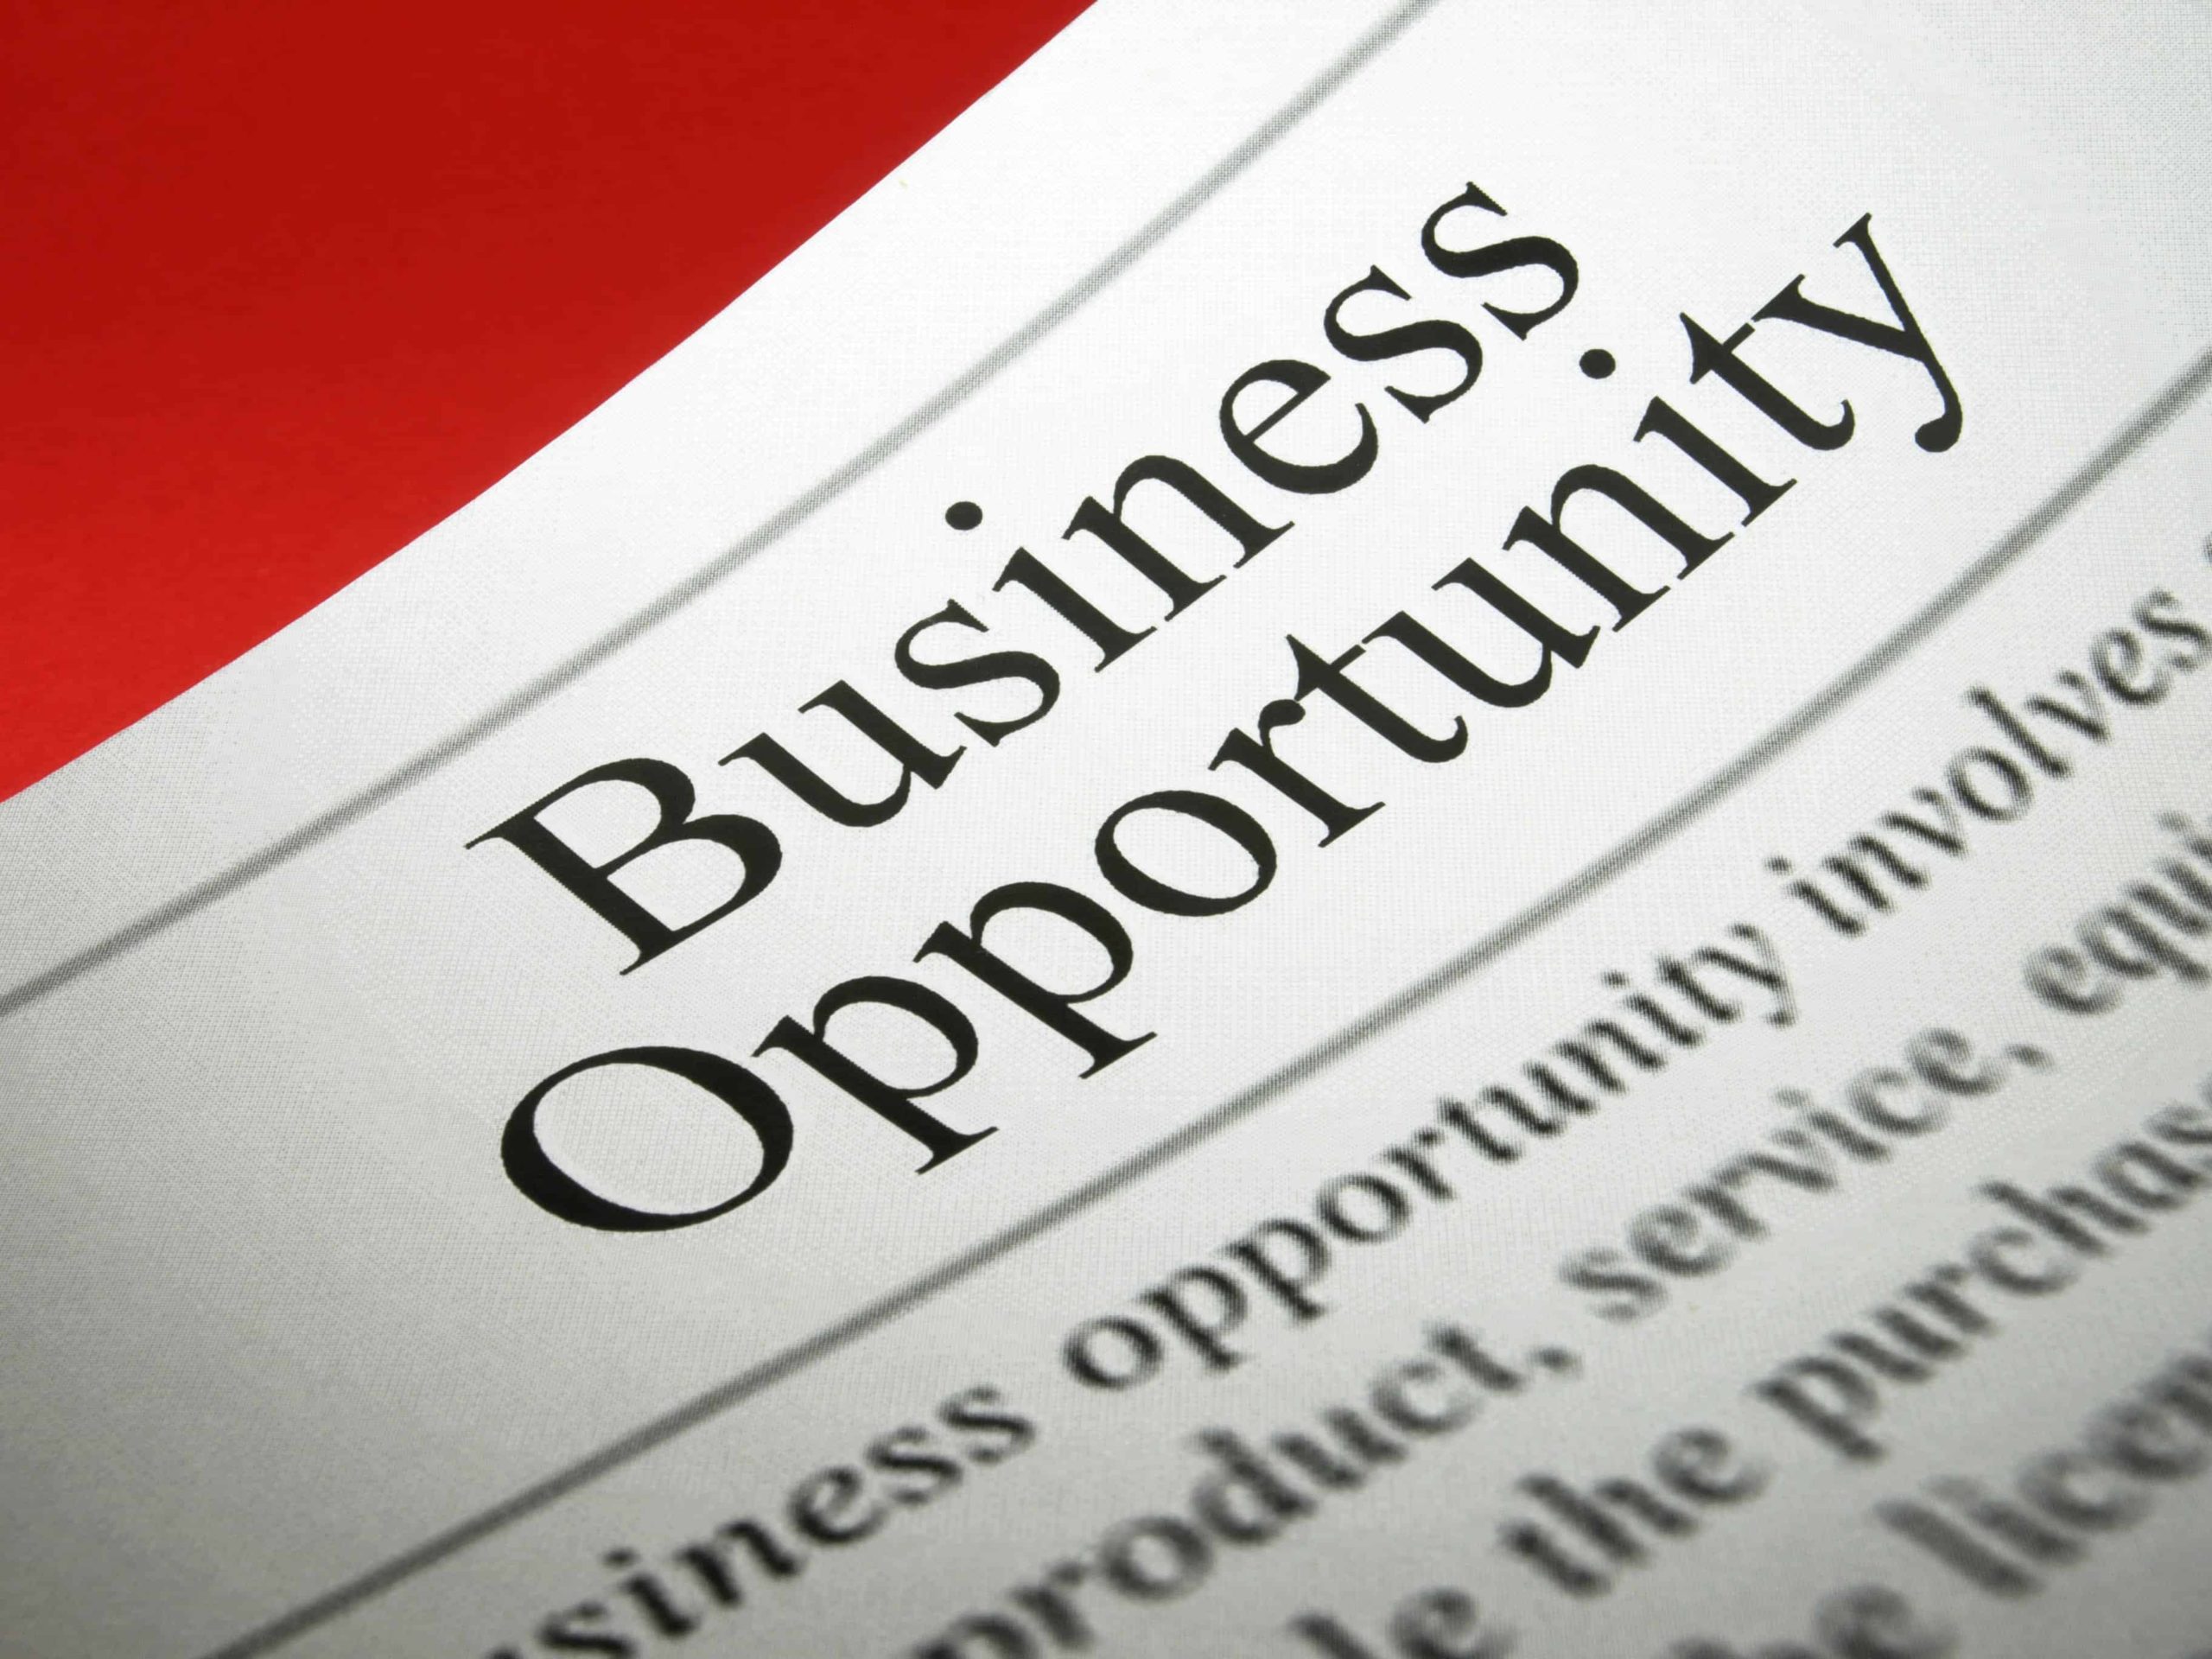 What You Need to Know About Business Opportunity Laws